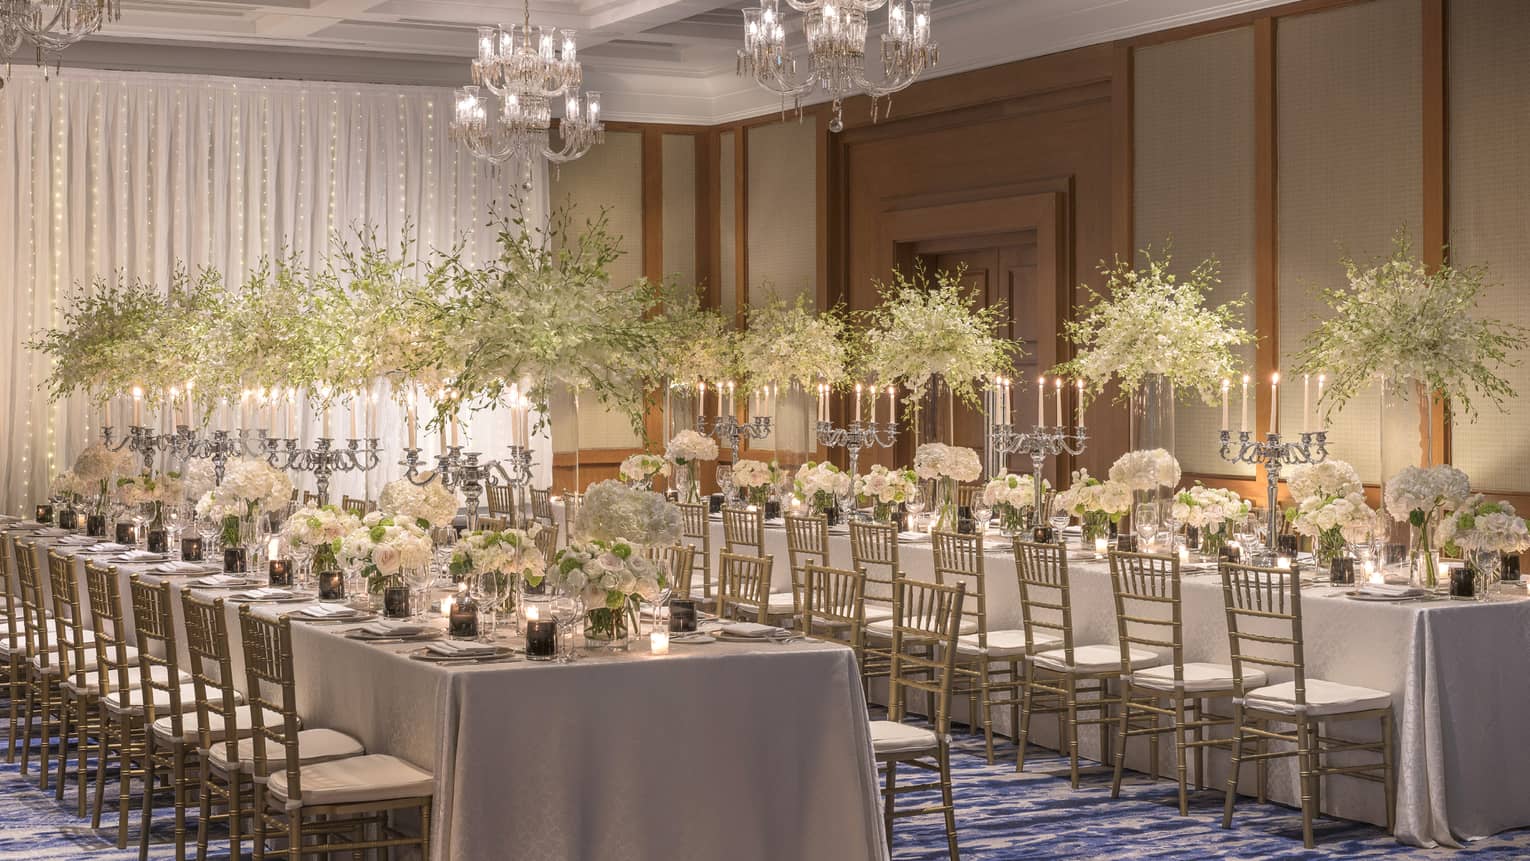 Two long tables are adorned with candelabras and tall and short bouquets of white flowers